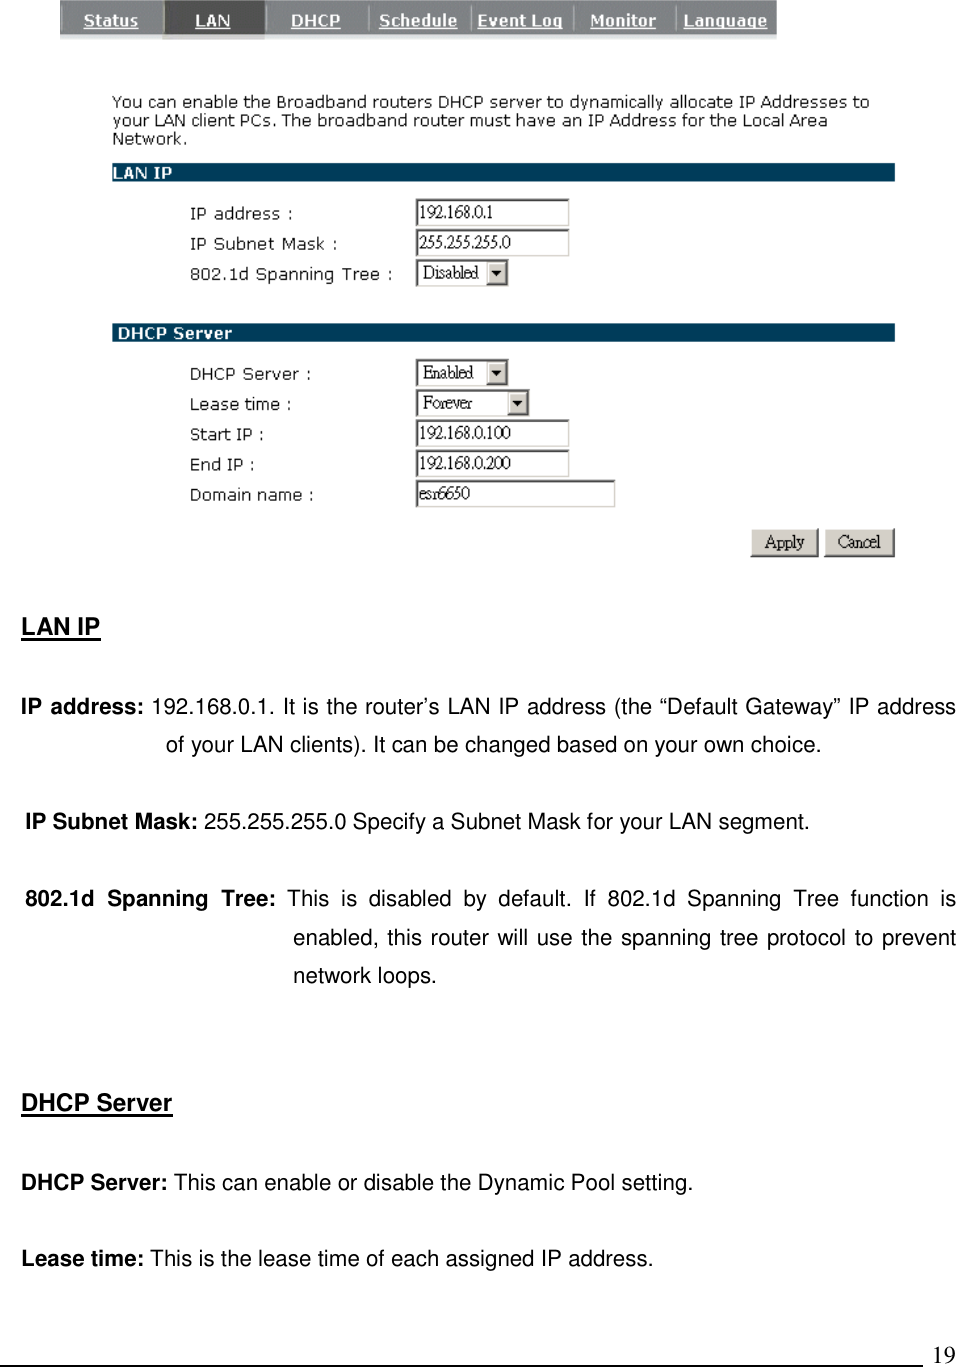   19   LAN IP  IP address: 192.168.0.1. It is the router’s LAN IP address (the “Default Gateway” IP address of your LAN clients). It can be changed based on your own choice.  IP Subnet Mask: 255.255.255.0 Specify a Subnet Mask for your LAN segment.  802.1d  Spanning  Tree:  This  is  disabled  by  default.  If  802.1d  Spanning  Tree  function  is enabled, this router will use the spanning tree protocol to prevent network loops.     DHCP Server  DHCP Server: This can enable or disable the Dynamic Pool setting.  Lease time: This is the lease time of each assigned IP address.  